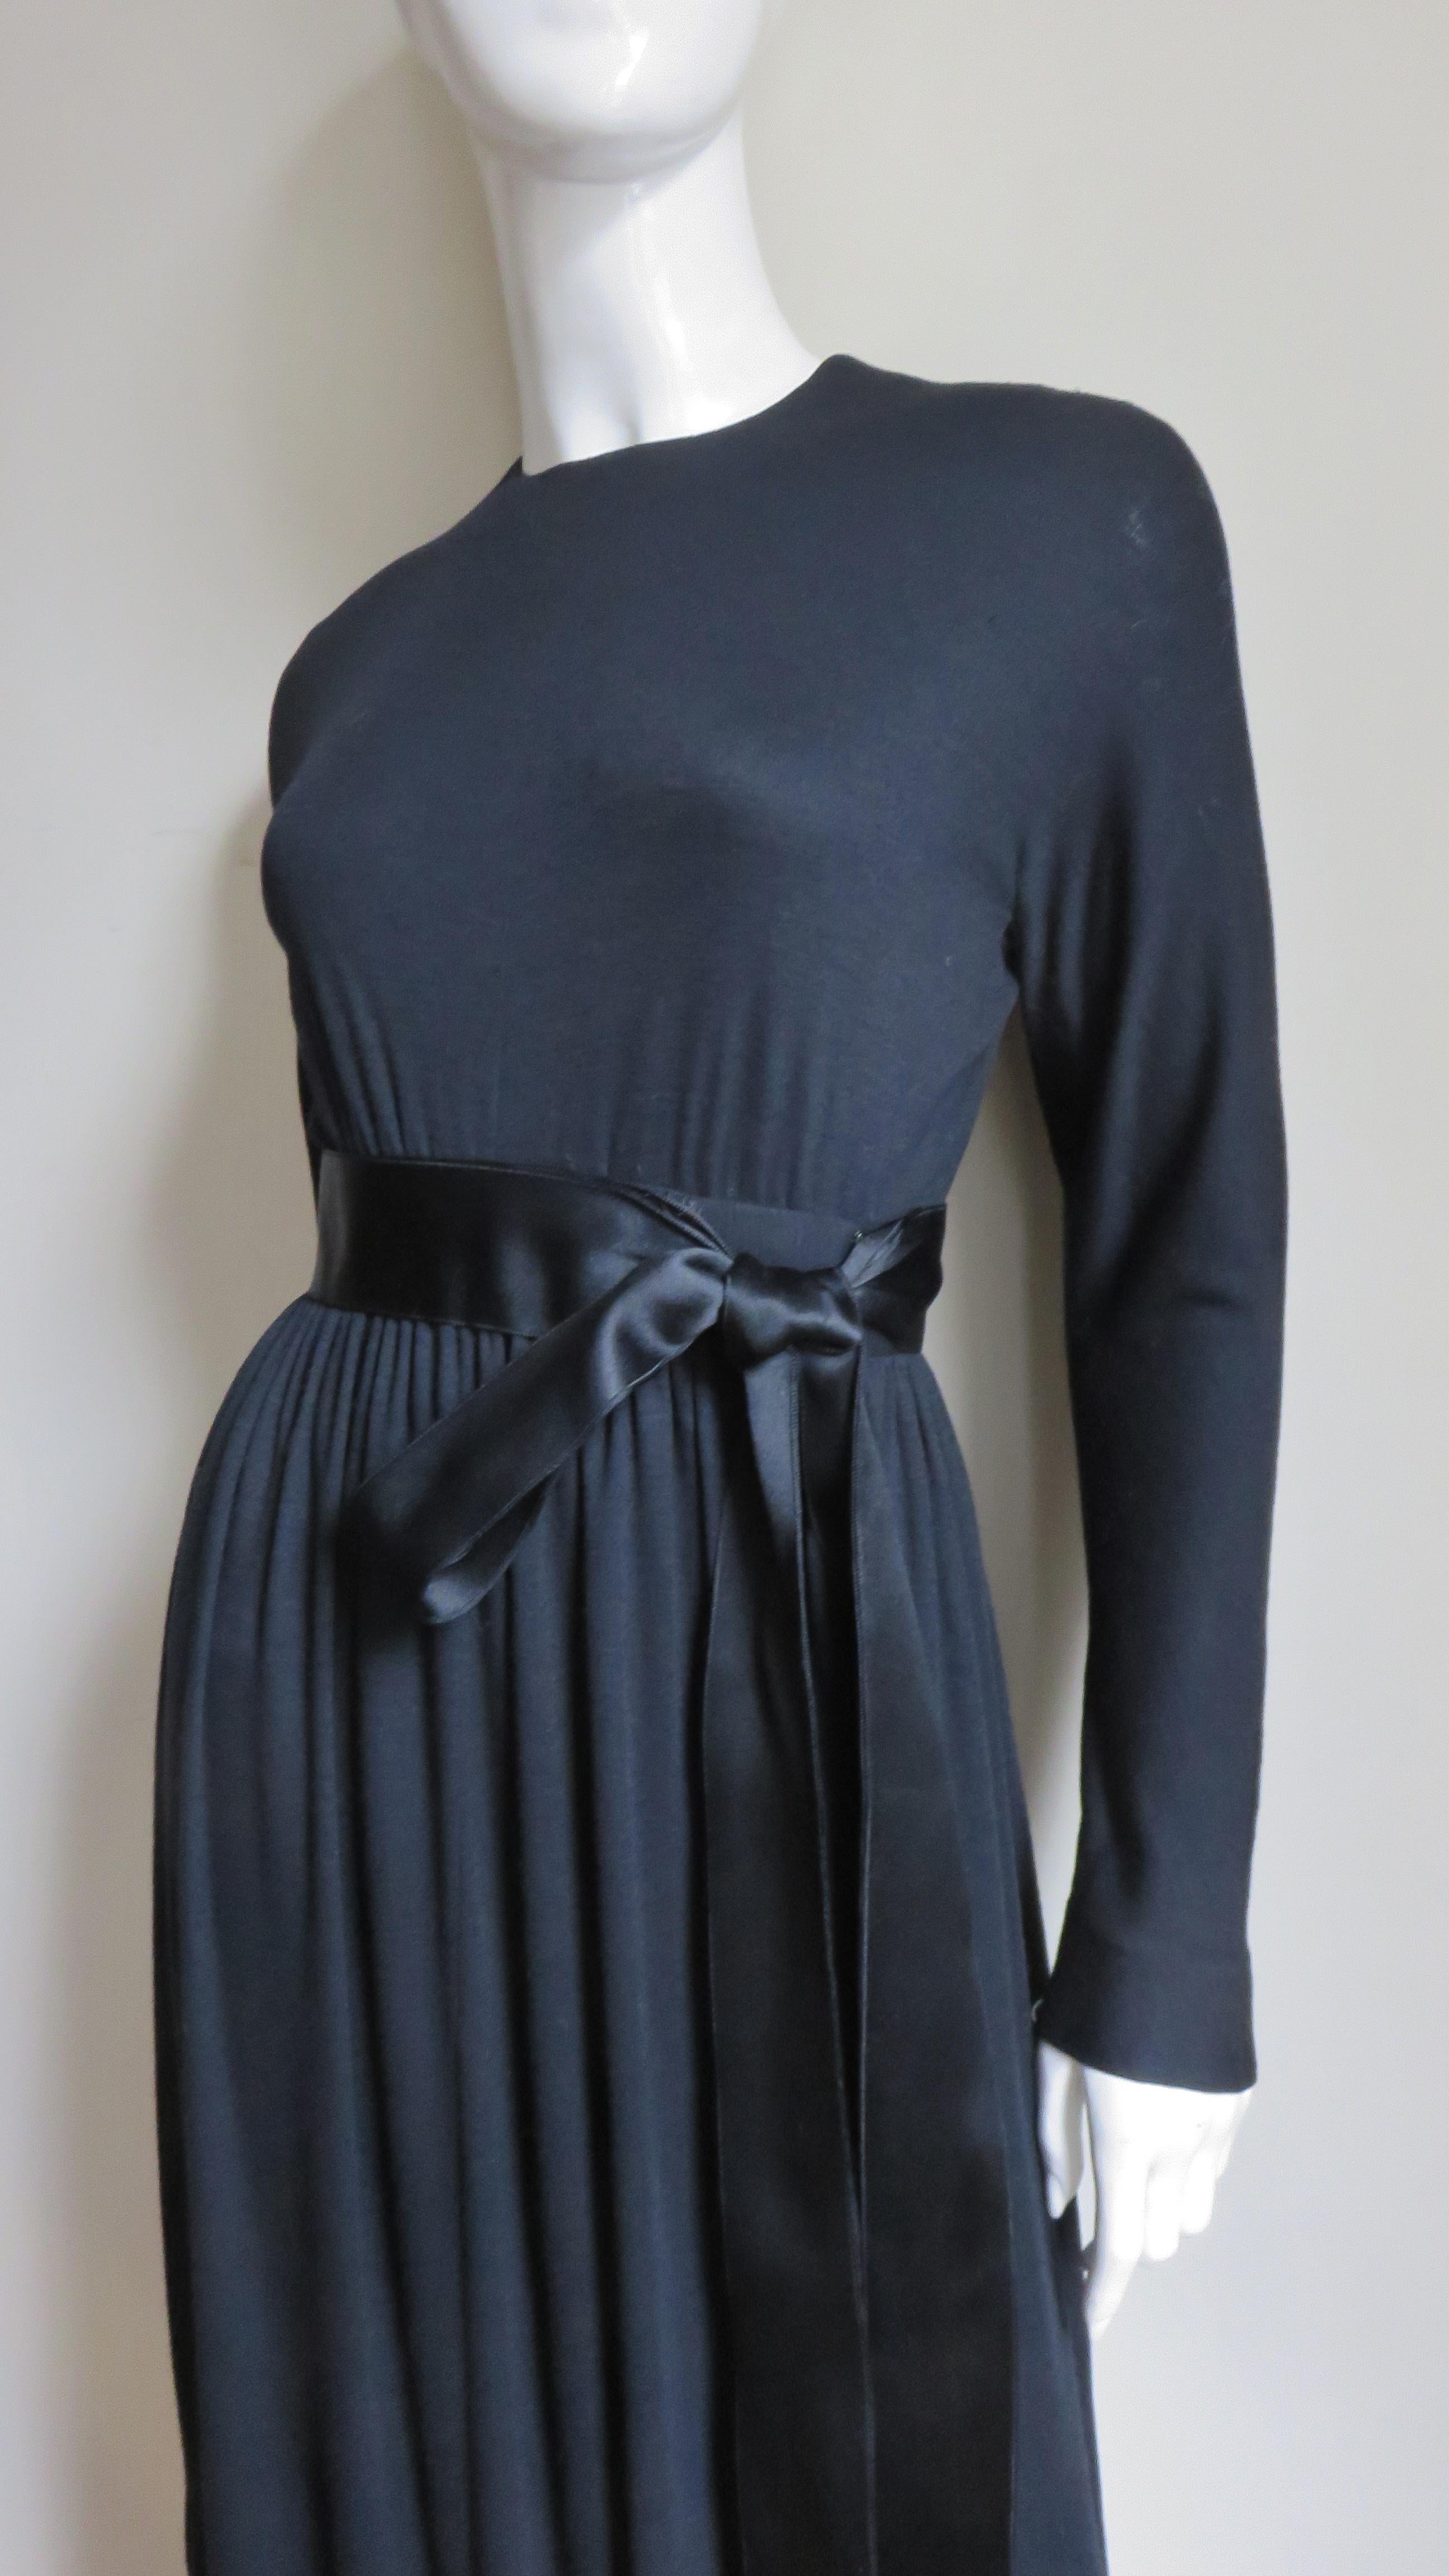  Norman Norell Maxi Dress Gown 1960s In Good Condition For Sale In Water Mill, NY